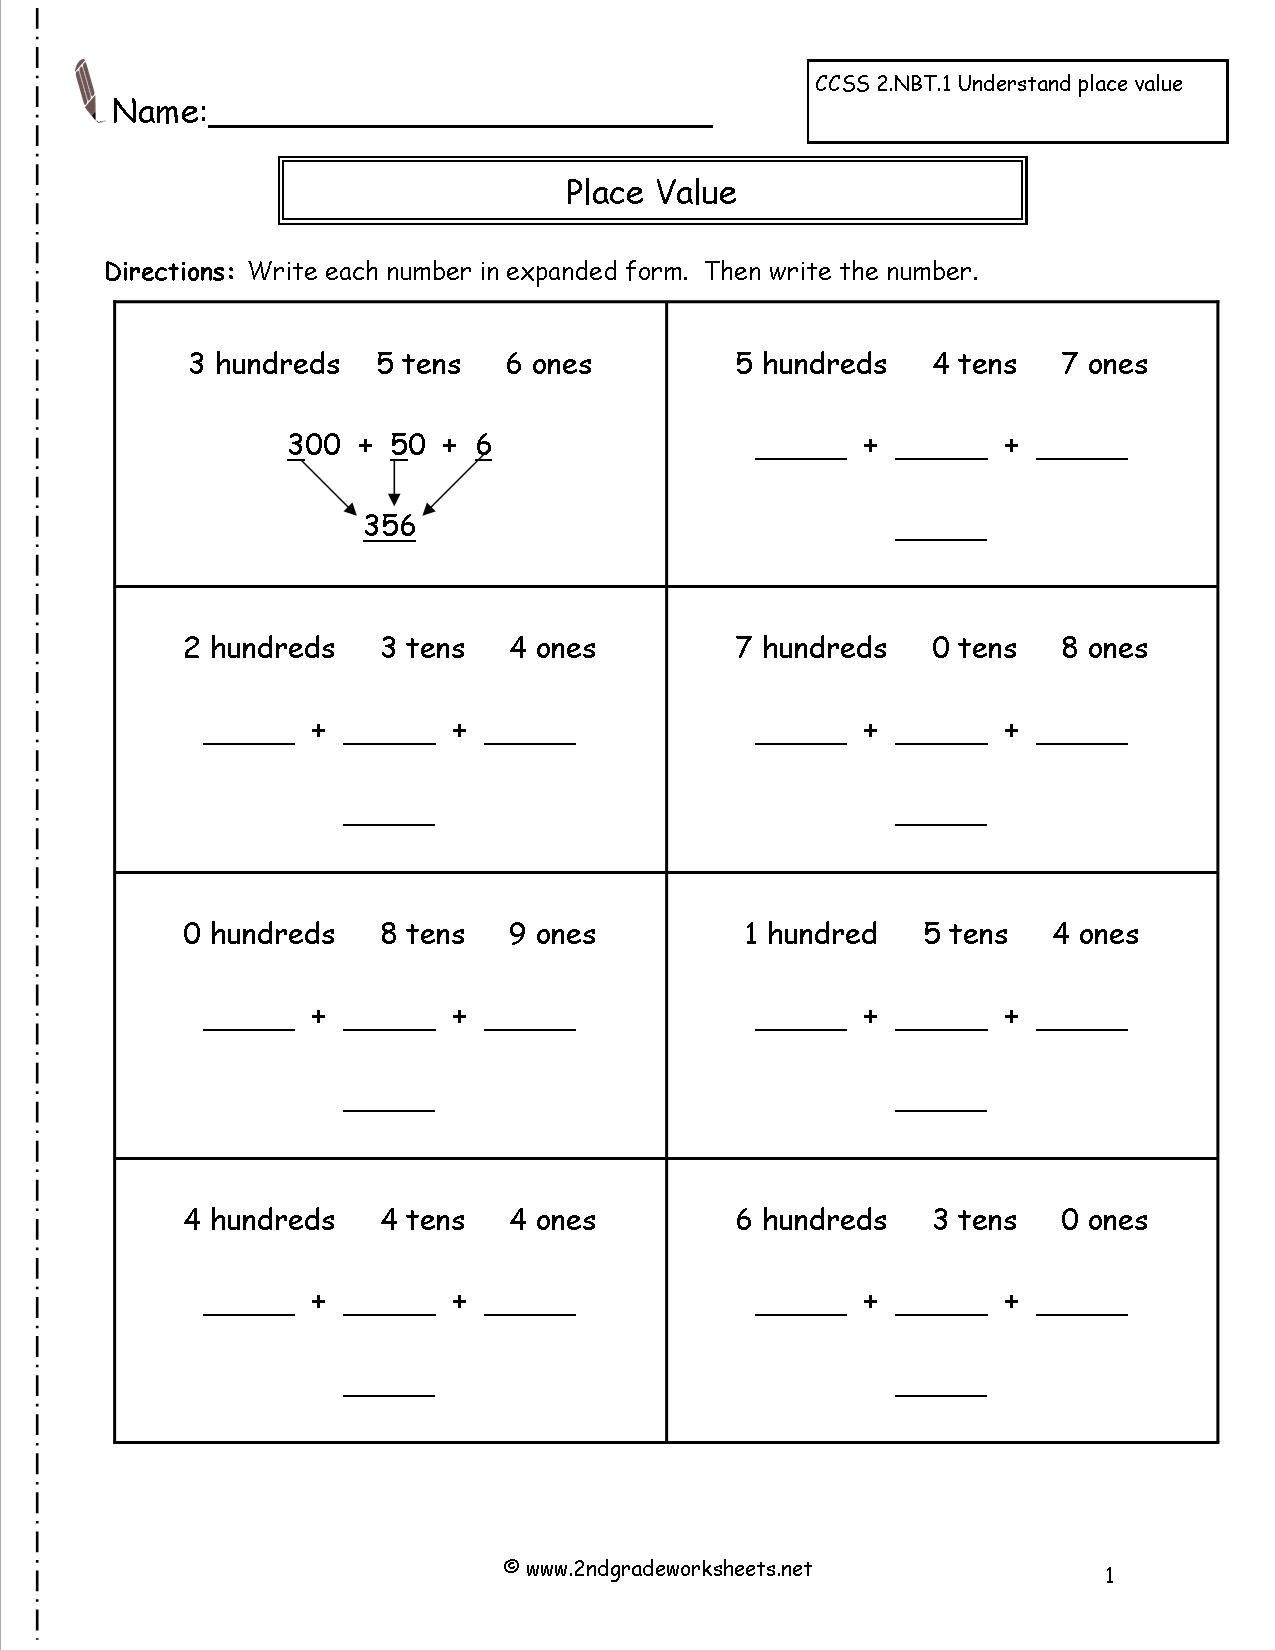 Free Math Worksheets First Grade 1 Place Value Write Numbers Expanded form